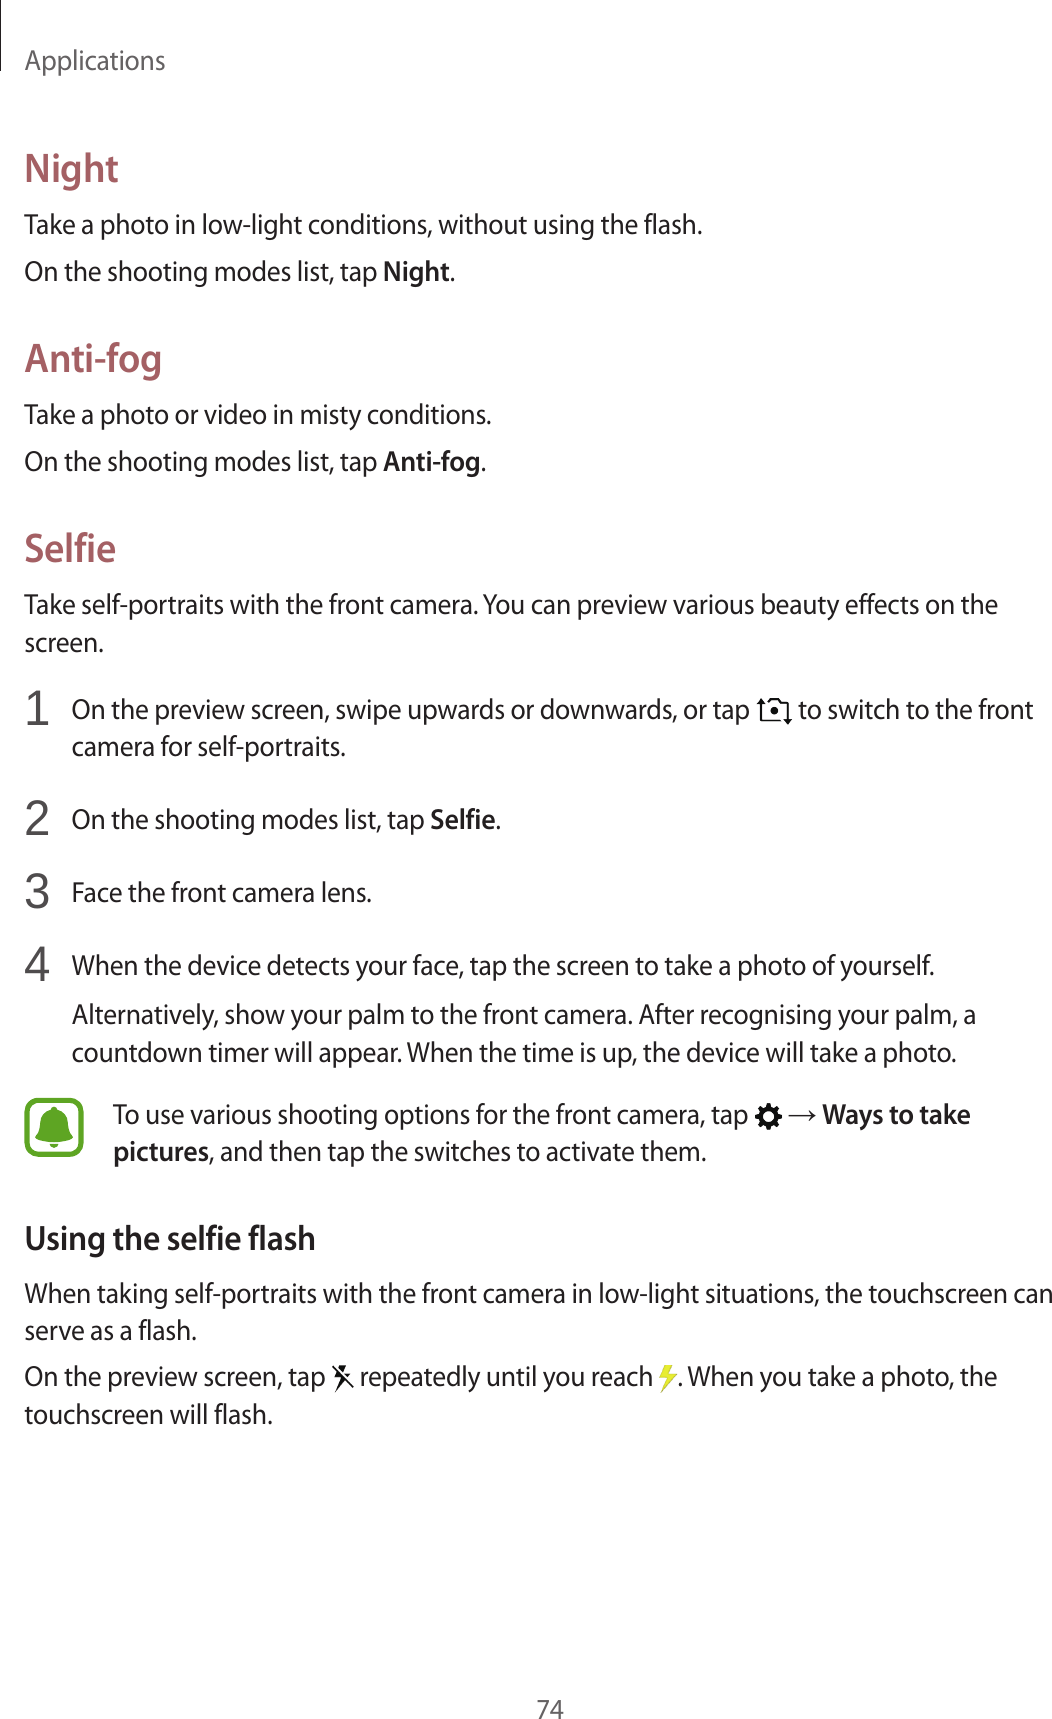 Applications74NightTake a photo in low-light conditions, without using the flash.On the shooting modes list, tap Night.Anti-fogTake a photo or video in misty conditions.On the shooting modes list, tap Anti-fog.SelfieTake self-portraits with the front camera. You can preview various beauty effects on the screen.1  On the preview screen, swipe upwards or downwards, or tap   to switch to the front camera for self-portraits.2  On the shooting modes list, tap Selfie.3  Face the front camera lens.4  When the device detects your face, tap the screen to take a photo of yourself.Alternatively, show your palm to the front camera. After recognising your palm, a countdown timer will appear. When the time is up, the device will take a photo.To use various shooting options for the front camera, tap   → Ways to take pictures, and then tap the switches to activate them.Using the selfie flashWhen taking self-portraits with the front camera in low-light situations, the touchscreen can serve as a flash.On the preview screen, tap   repeatedly until you reach  . When you take a photo, the touchscreen will flash.